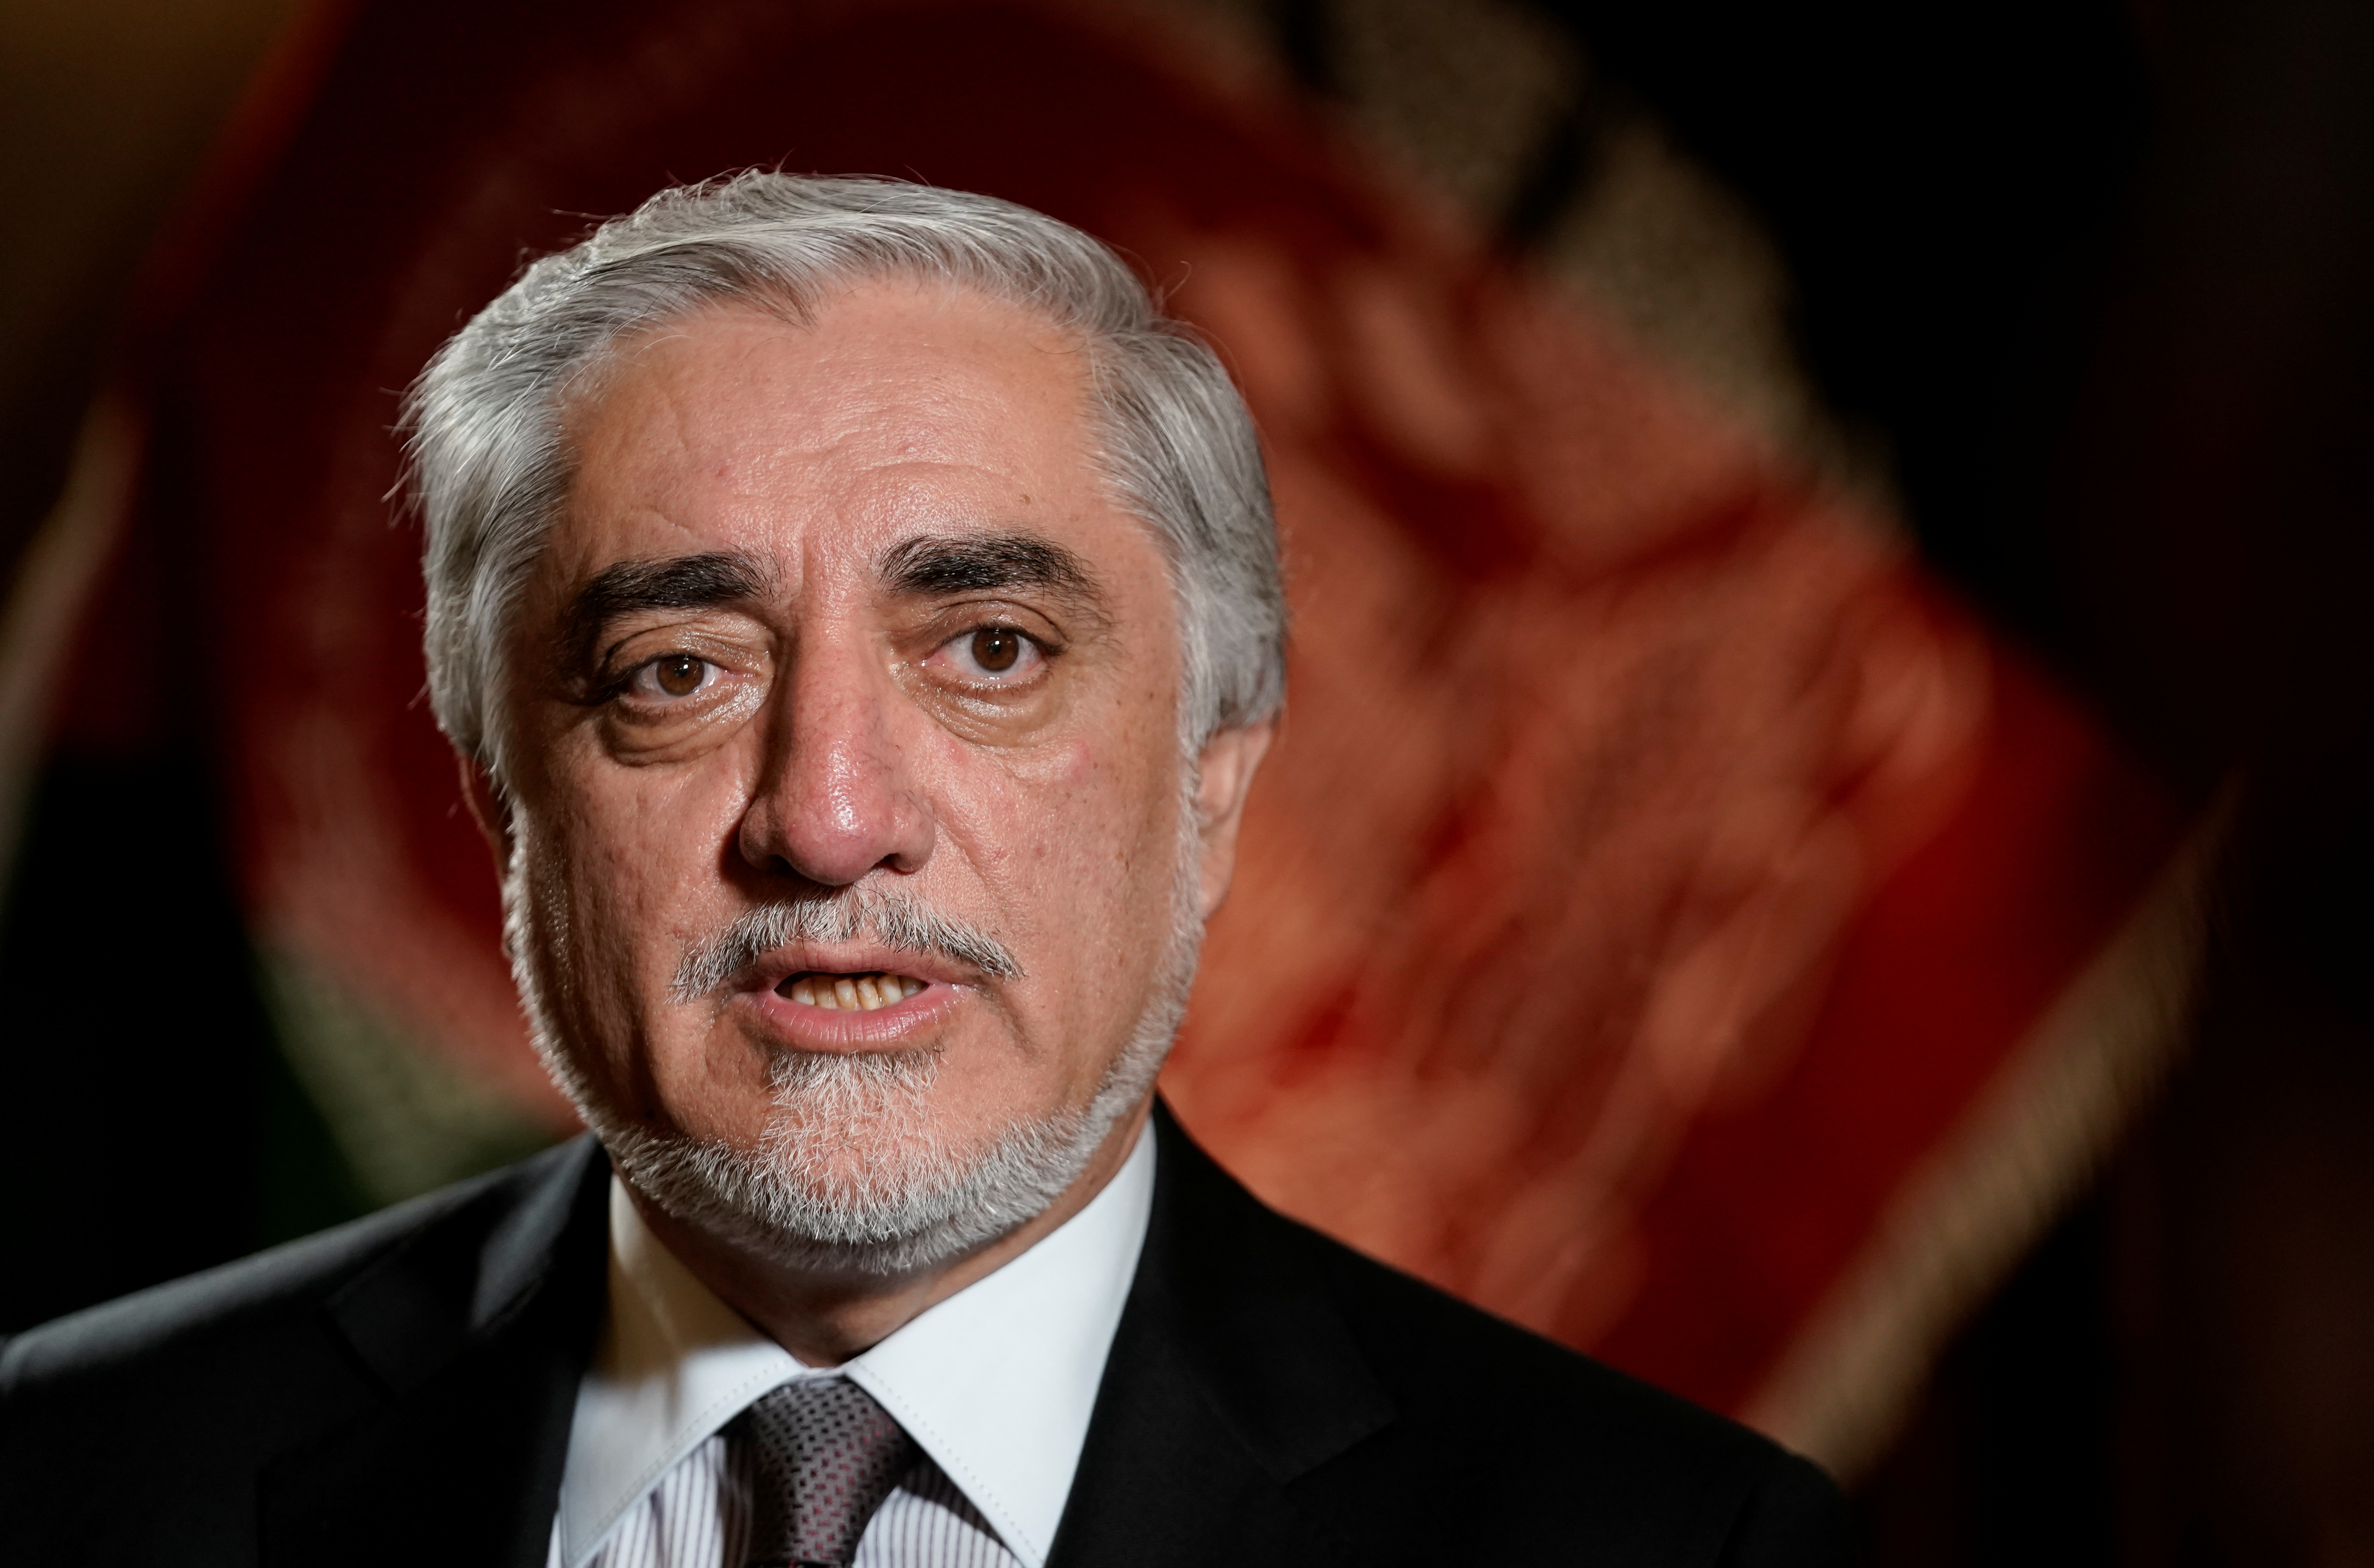 Chairman of Afghanistan's High Council for National Reconciliation Abdullah Abdullah speaks during an interview with Reuters at the Willard Hotel